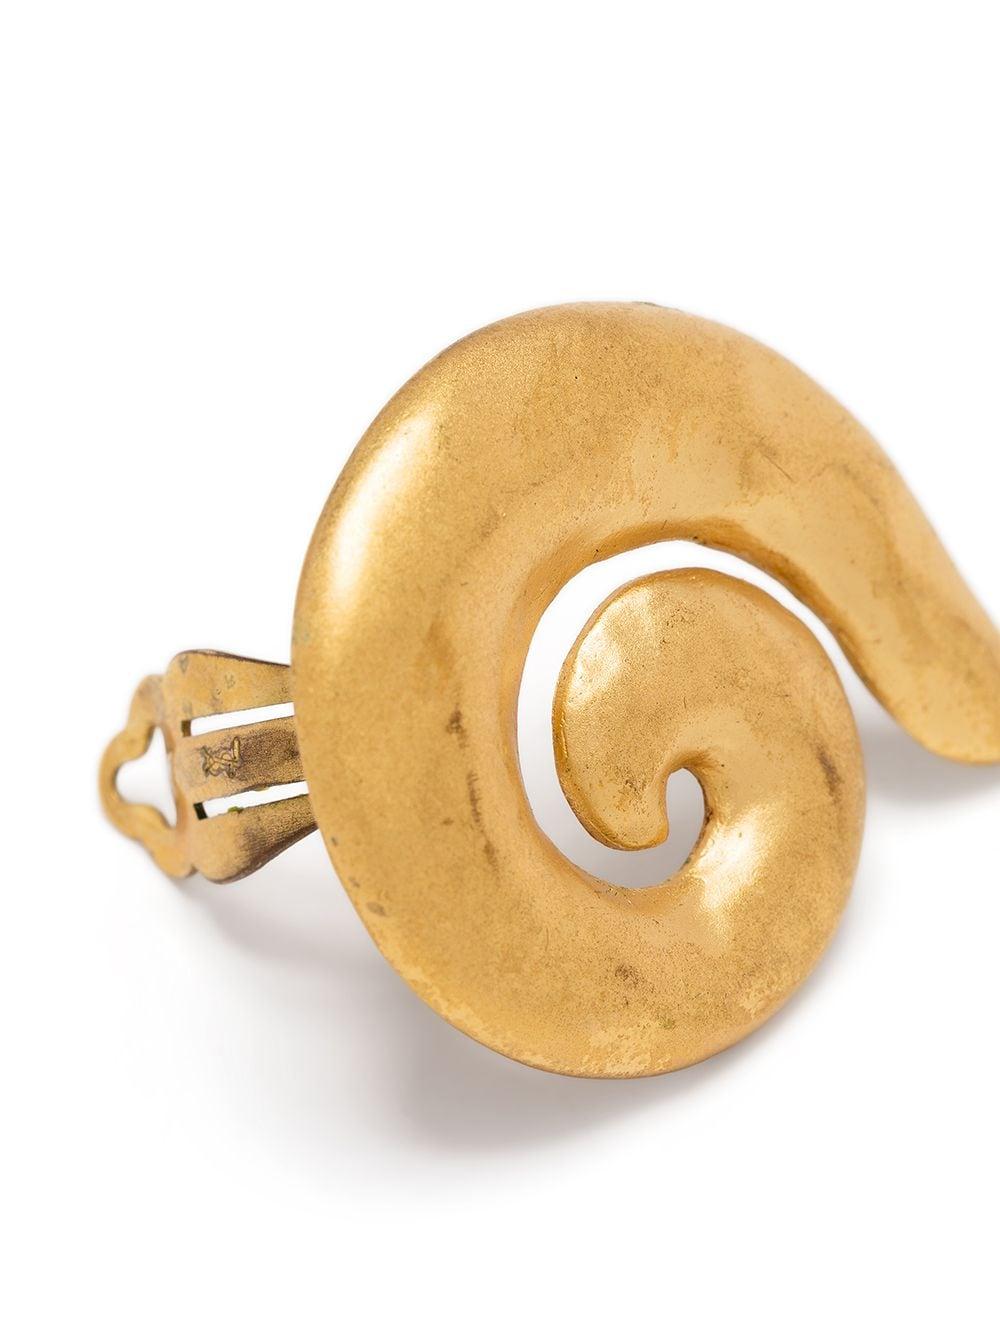 A vintage pair of clip-on earrings from Yves Saint Laurent that exude artisanal elegance. Featuring a spiral design and a clip-on fastening to the back.

Colour: Gold

Material: Gold-plated metal

Measurements: Width: 4.5cm

Pre-owned, excellent